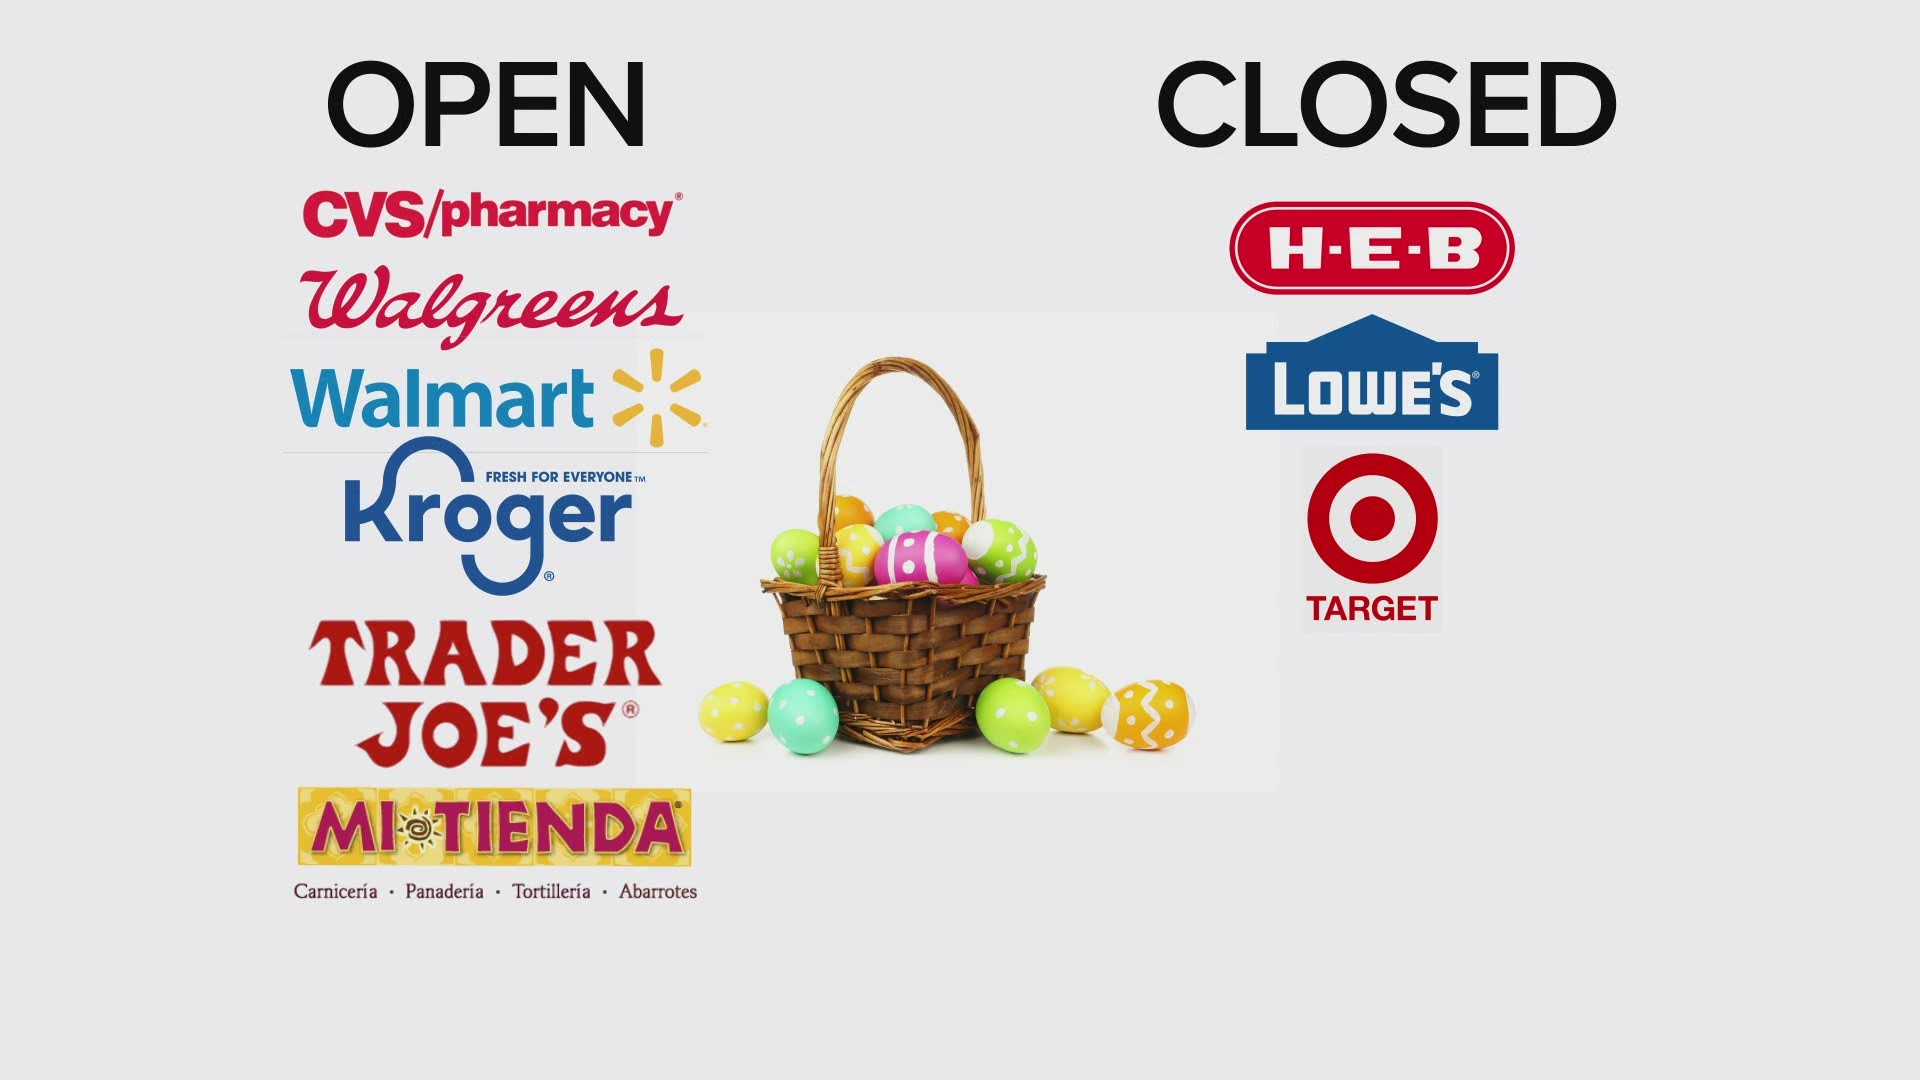 What store are closed on Easter Sunday?